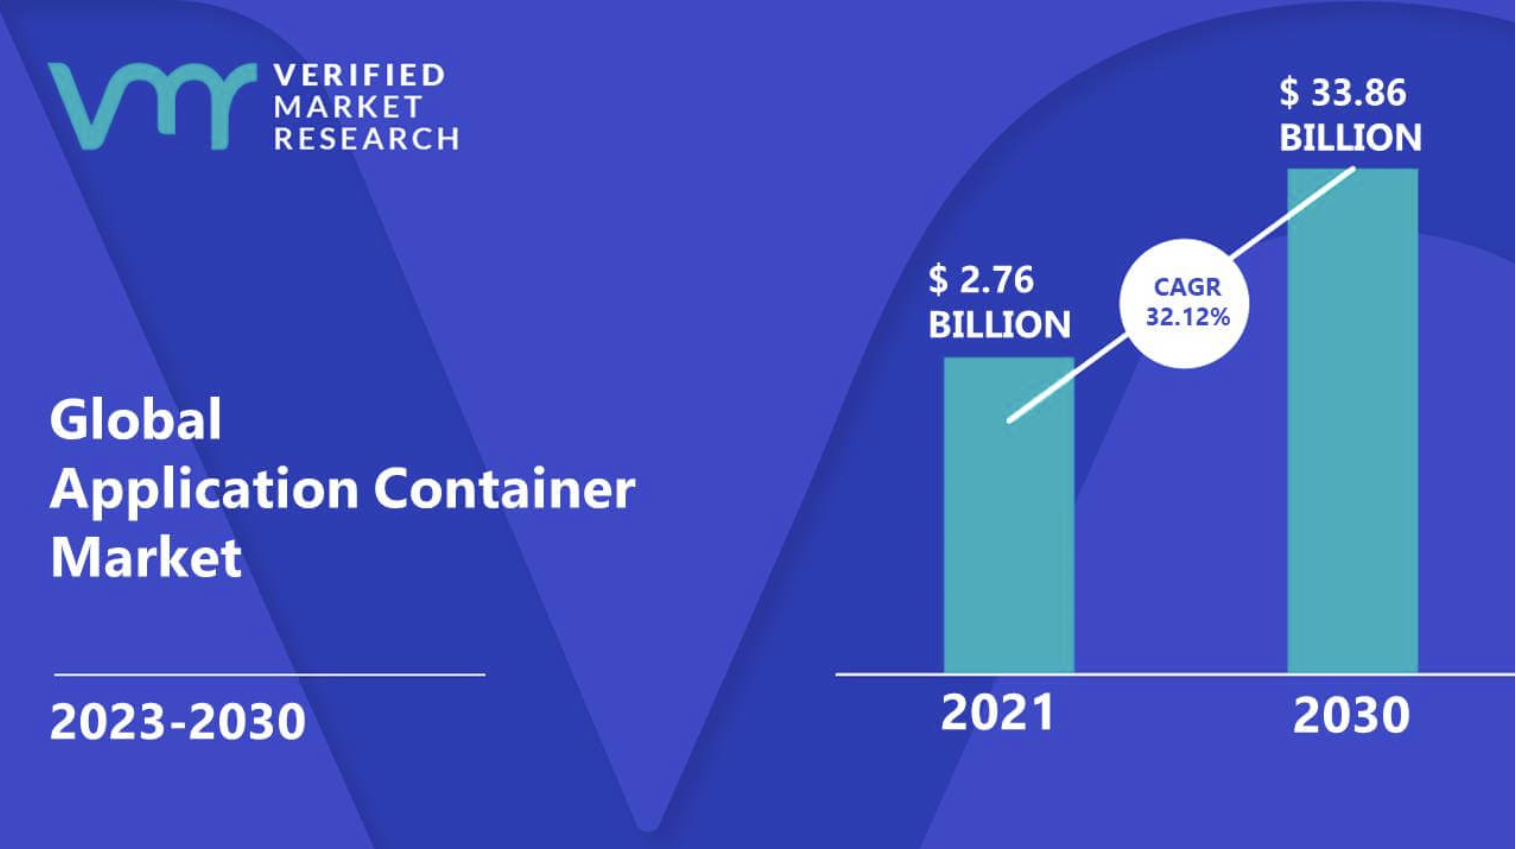 what is containerization